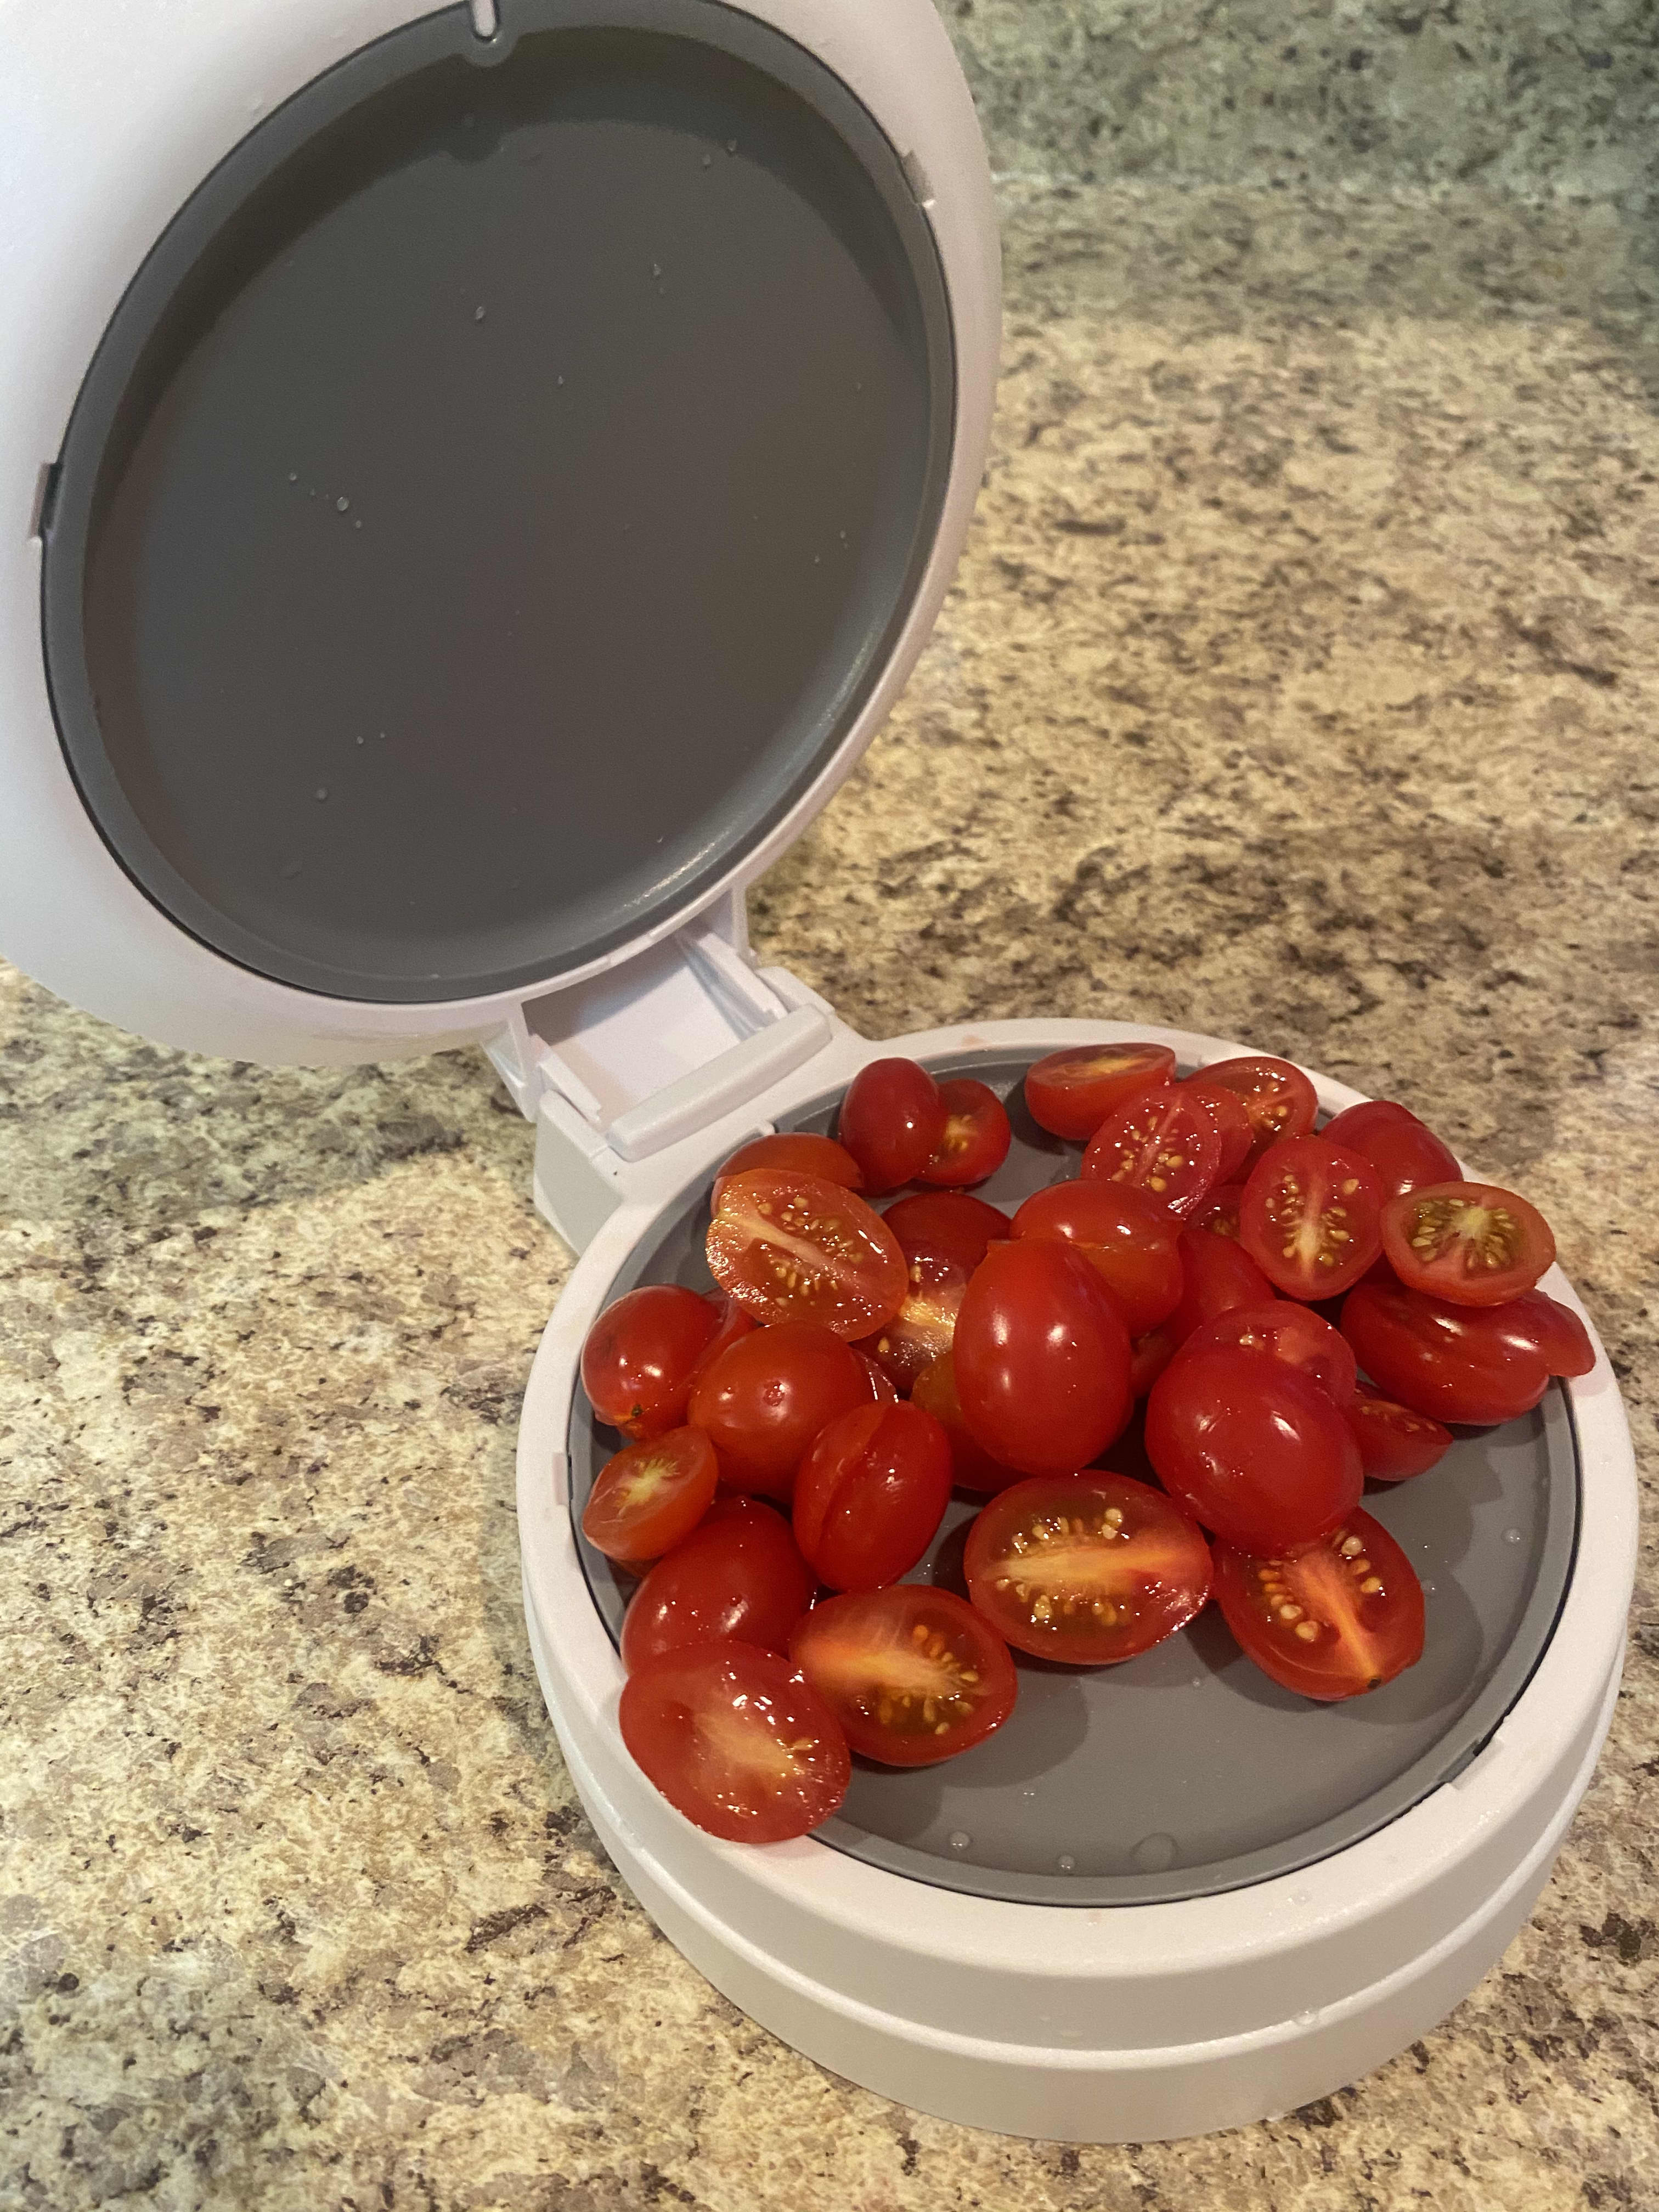 Zip Slicer Cutter Slice cherry tomatoes, and more